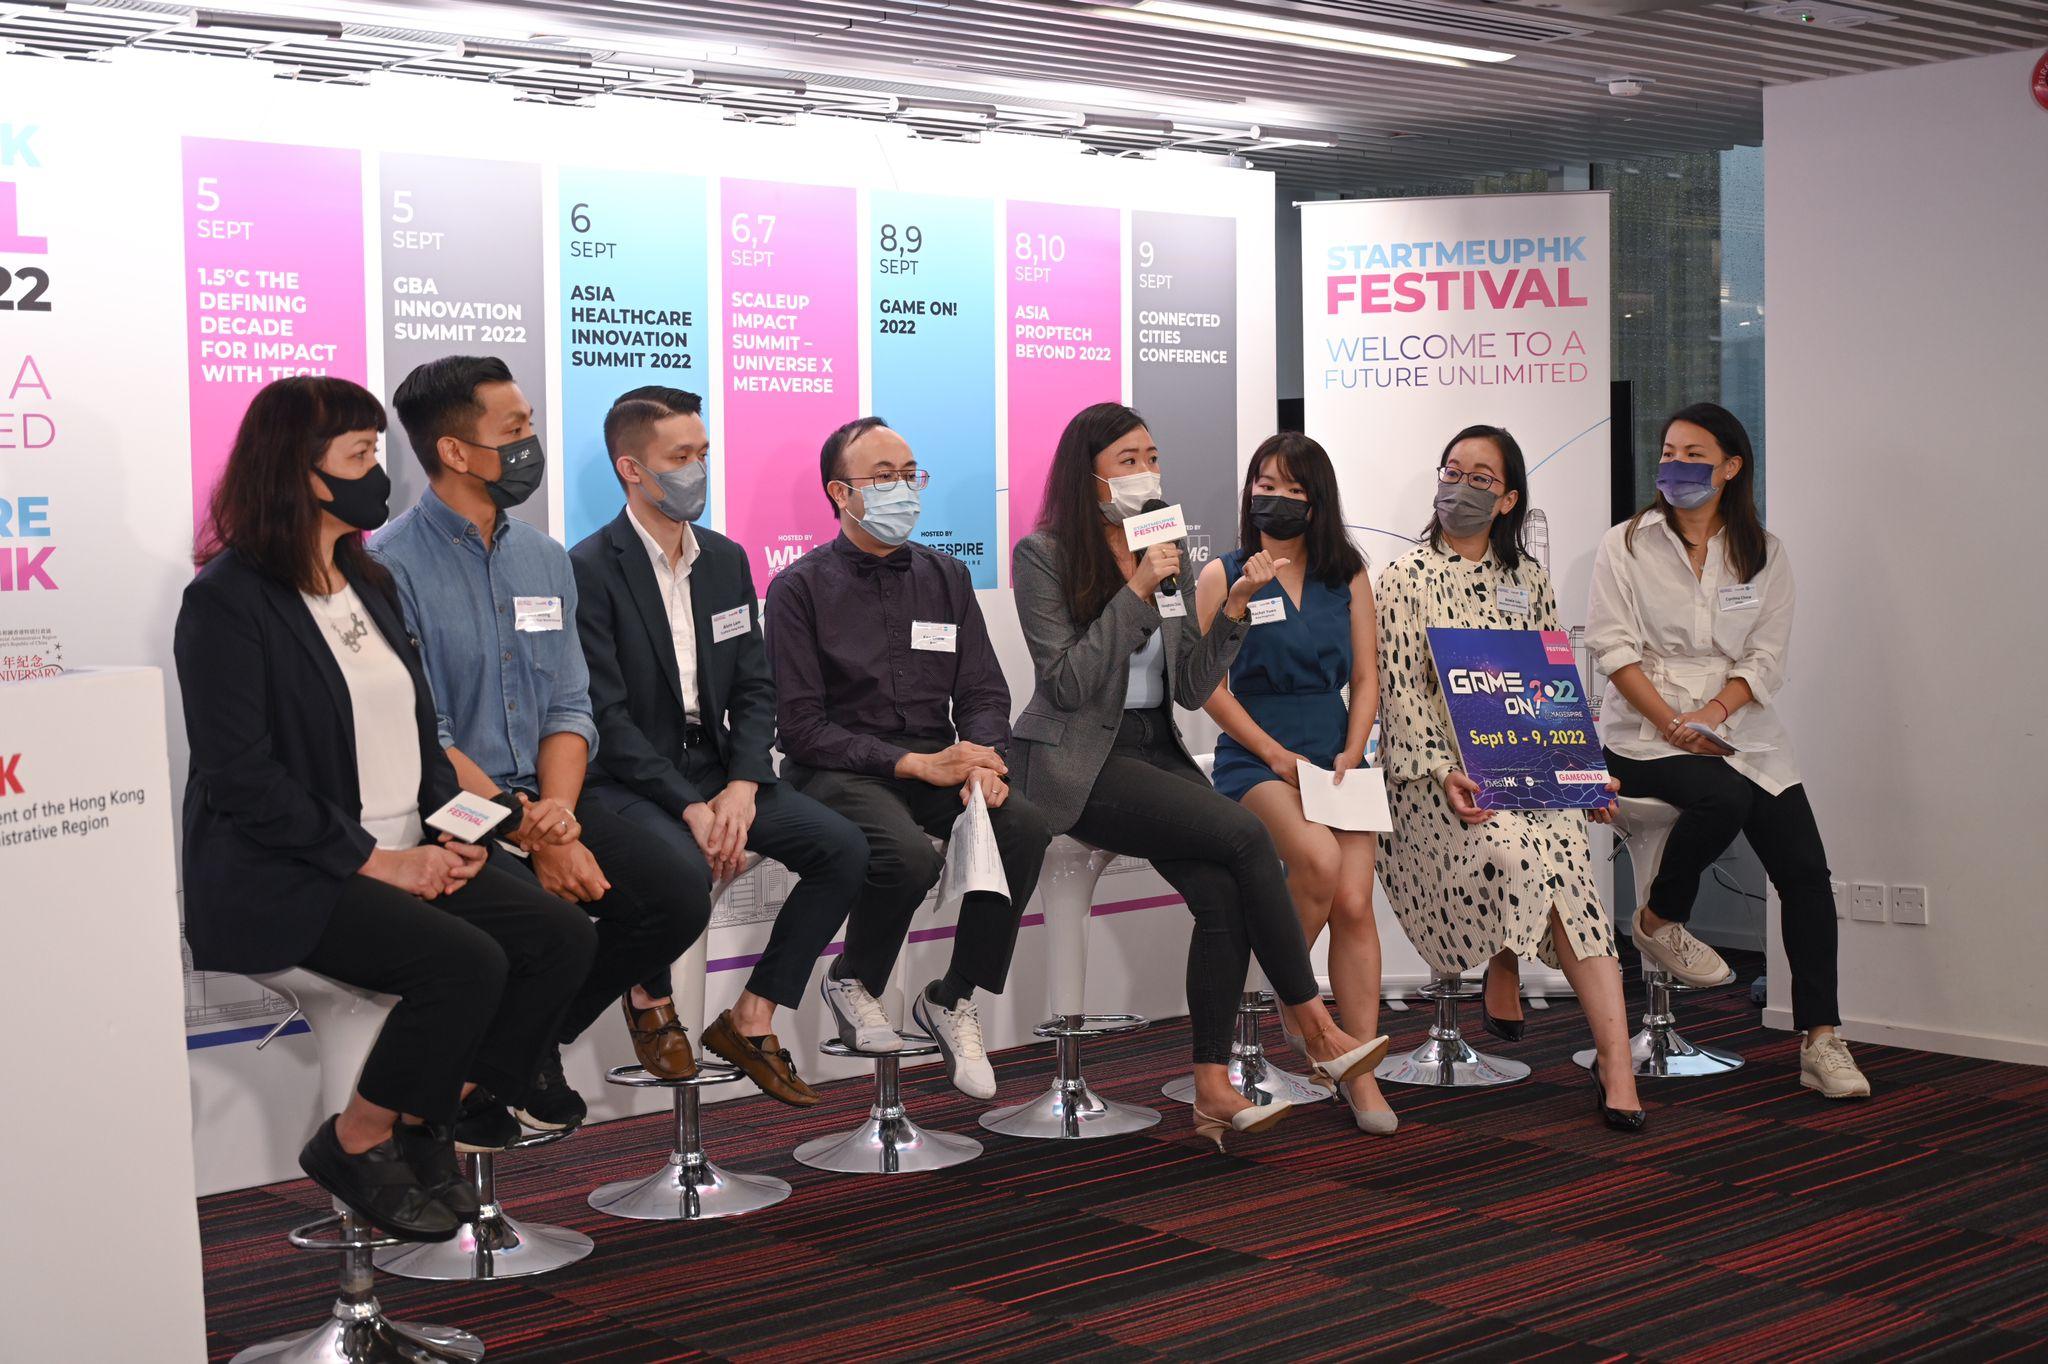 The annual StartmeupHK Festival curated by Invest Hong Kong returns in a hybrid format on September 5 to 10 following last year's success. Photo shows one of the organisers sharing details of the main events, and highlighted topics and speakers.